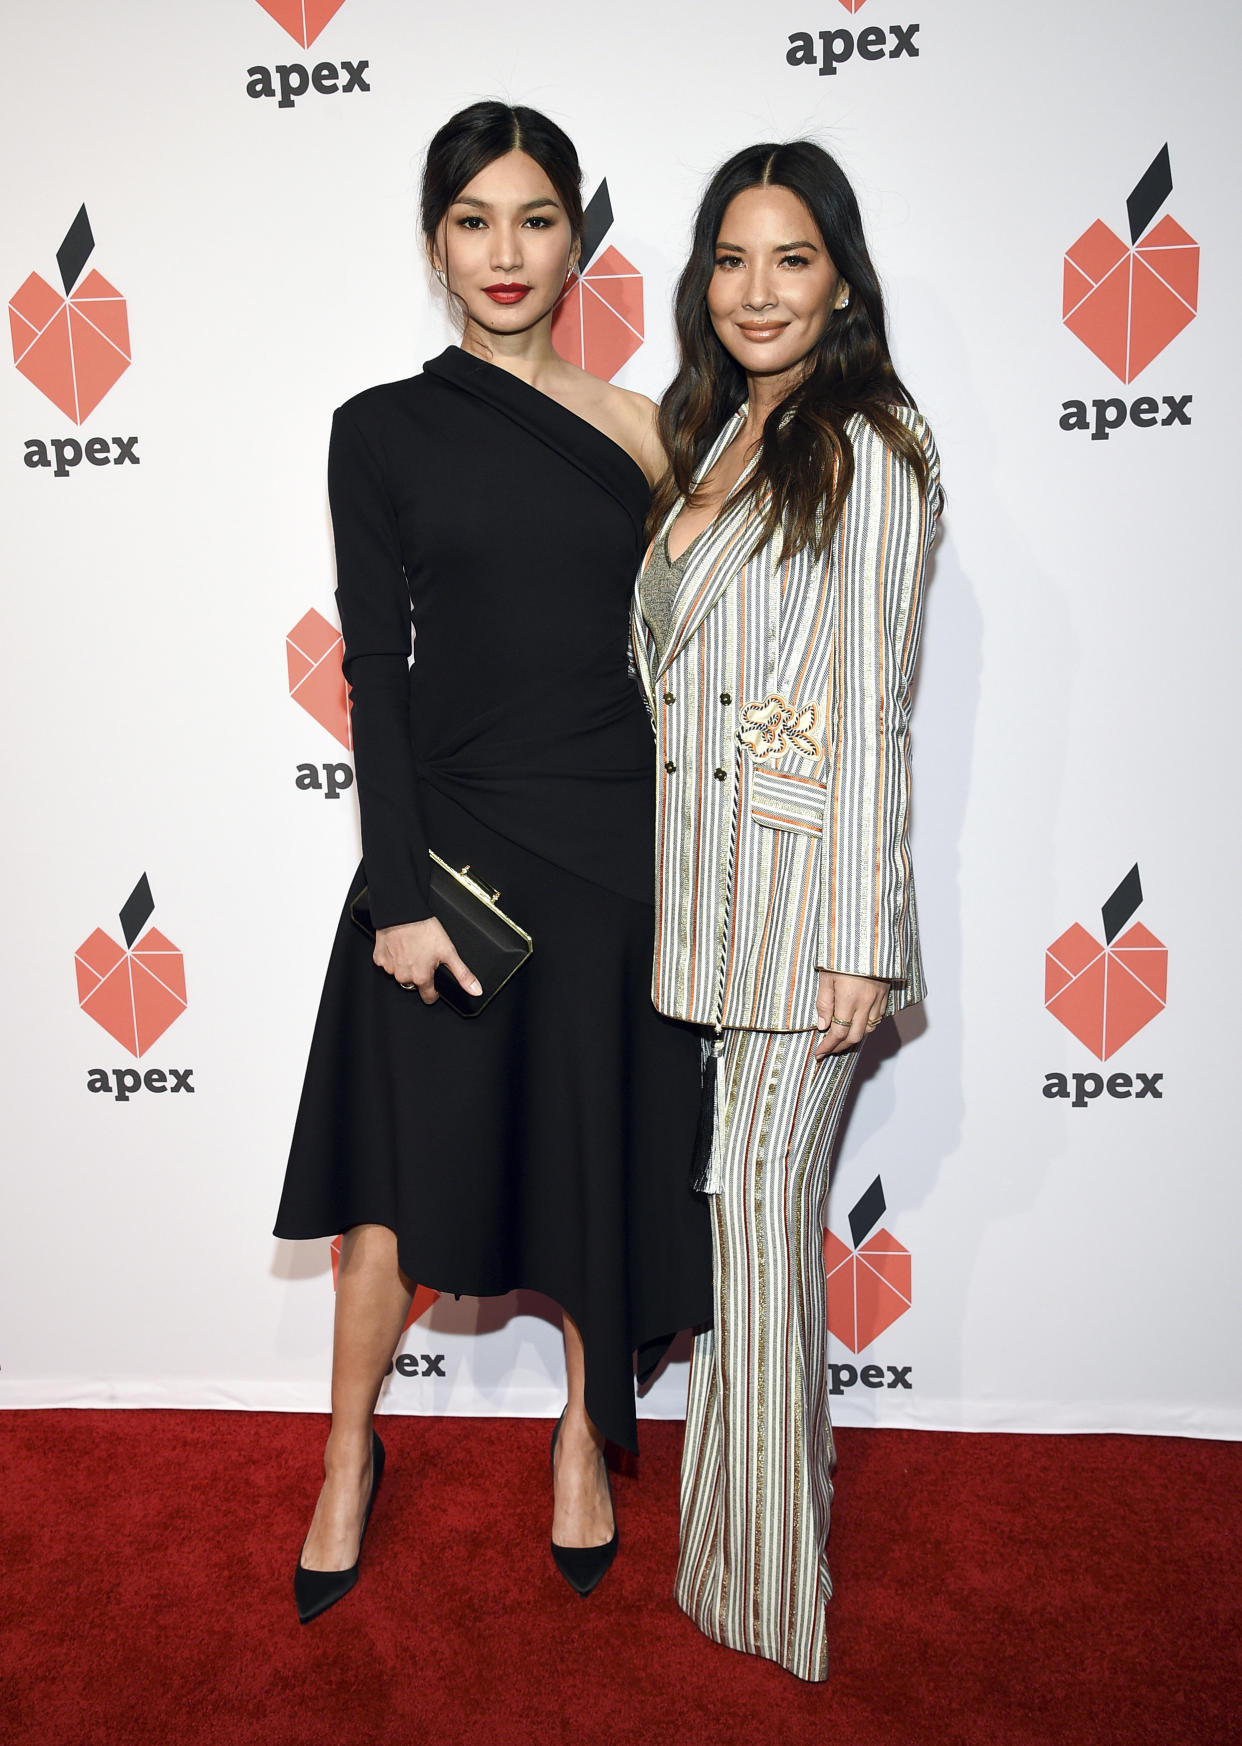 Gemma Chan, left, and Olivia Munn attend the 27th Anniversary Inspiration Awards Gala on Wednesday in New York City. (Evan Agostini/Invision/AP)